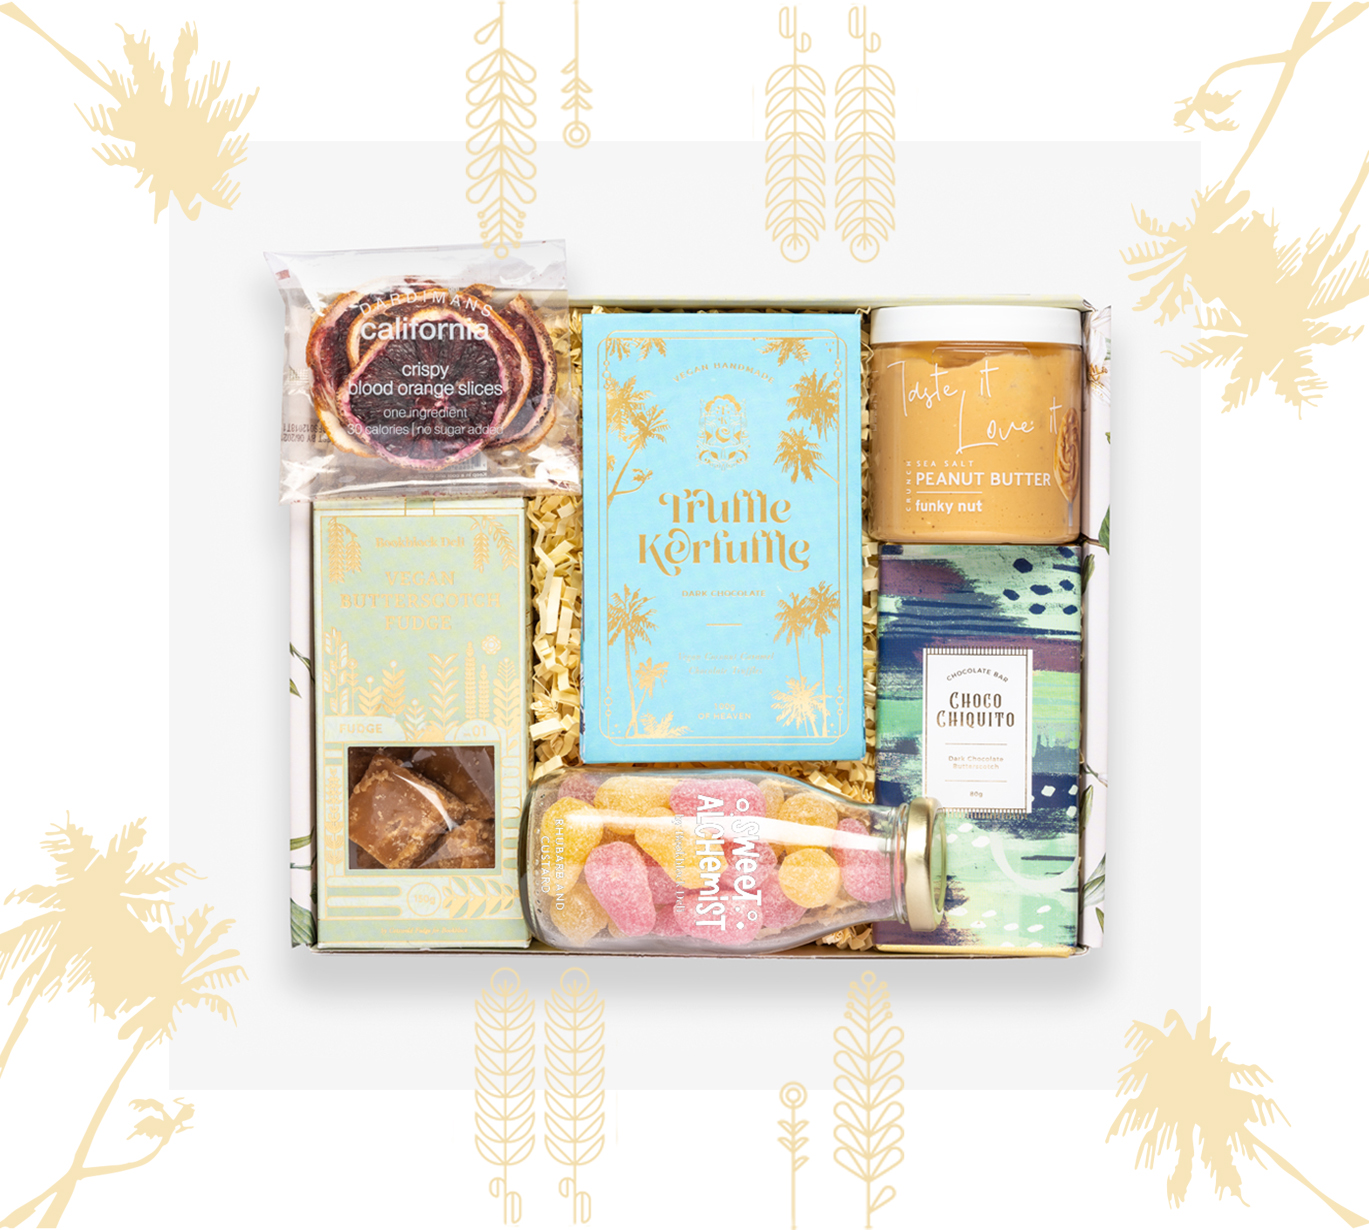 Vegan Sweet Shop Gift Box with decorative detail in gold